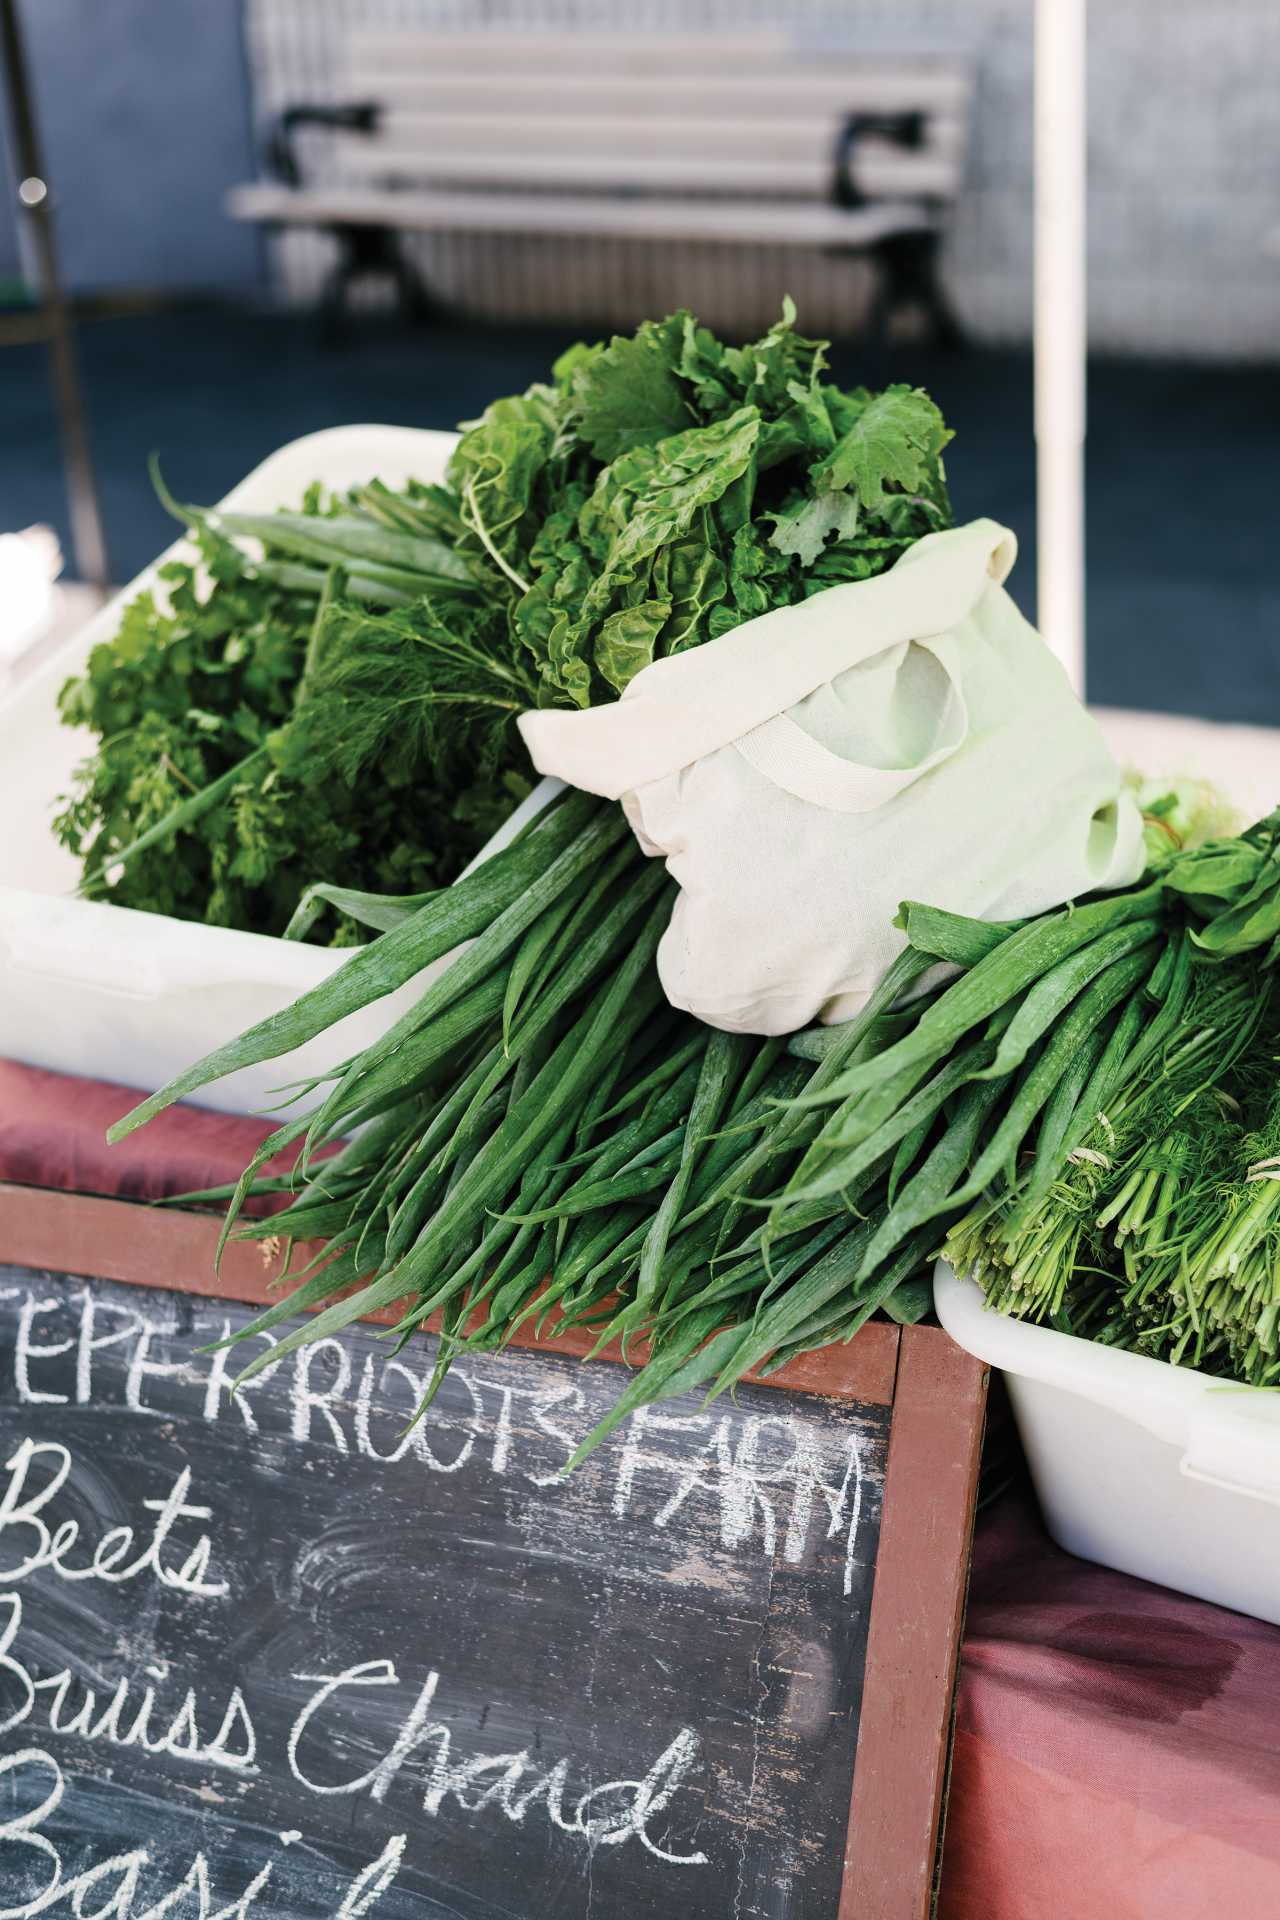 Deeply Rooted Farmers' Market | Fresh produce from Deeper Roots Farms